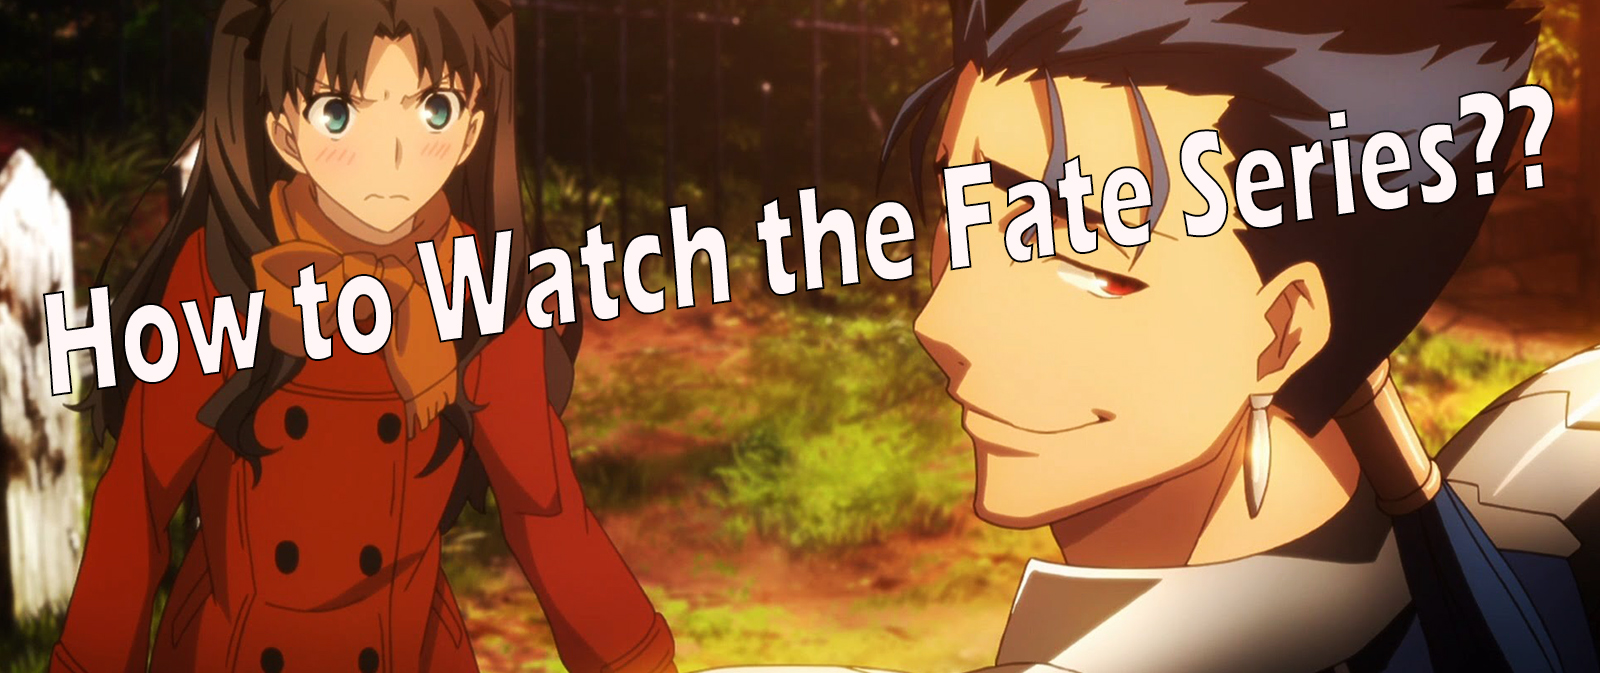 Made a very simple and easy to follow Fate/ watch order guide. : r/anime